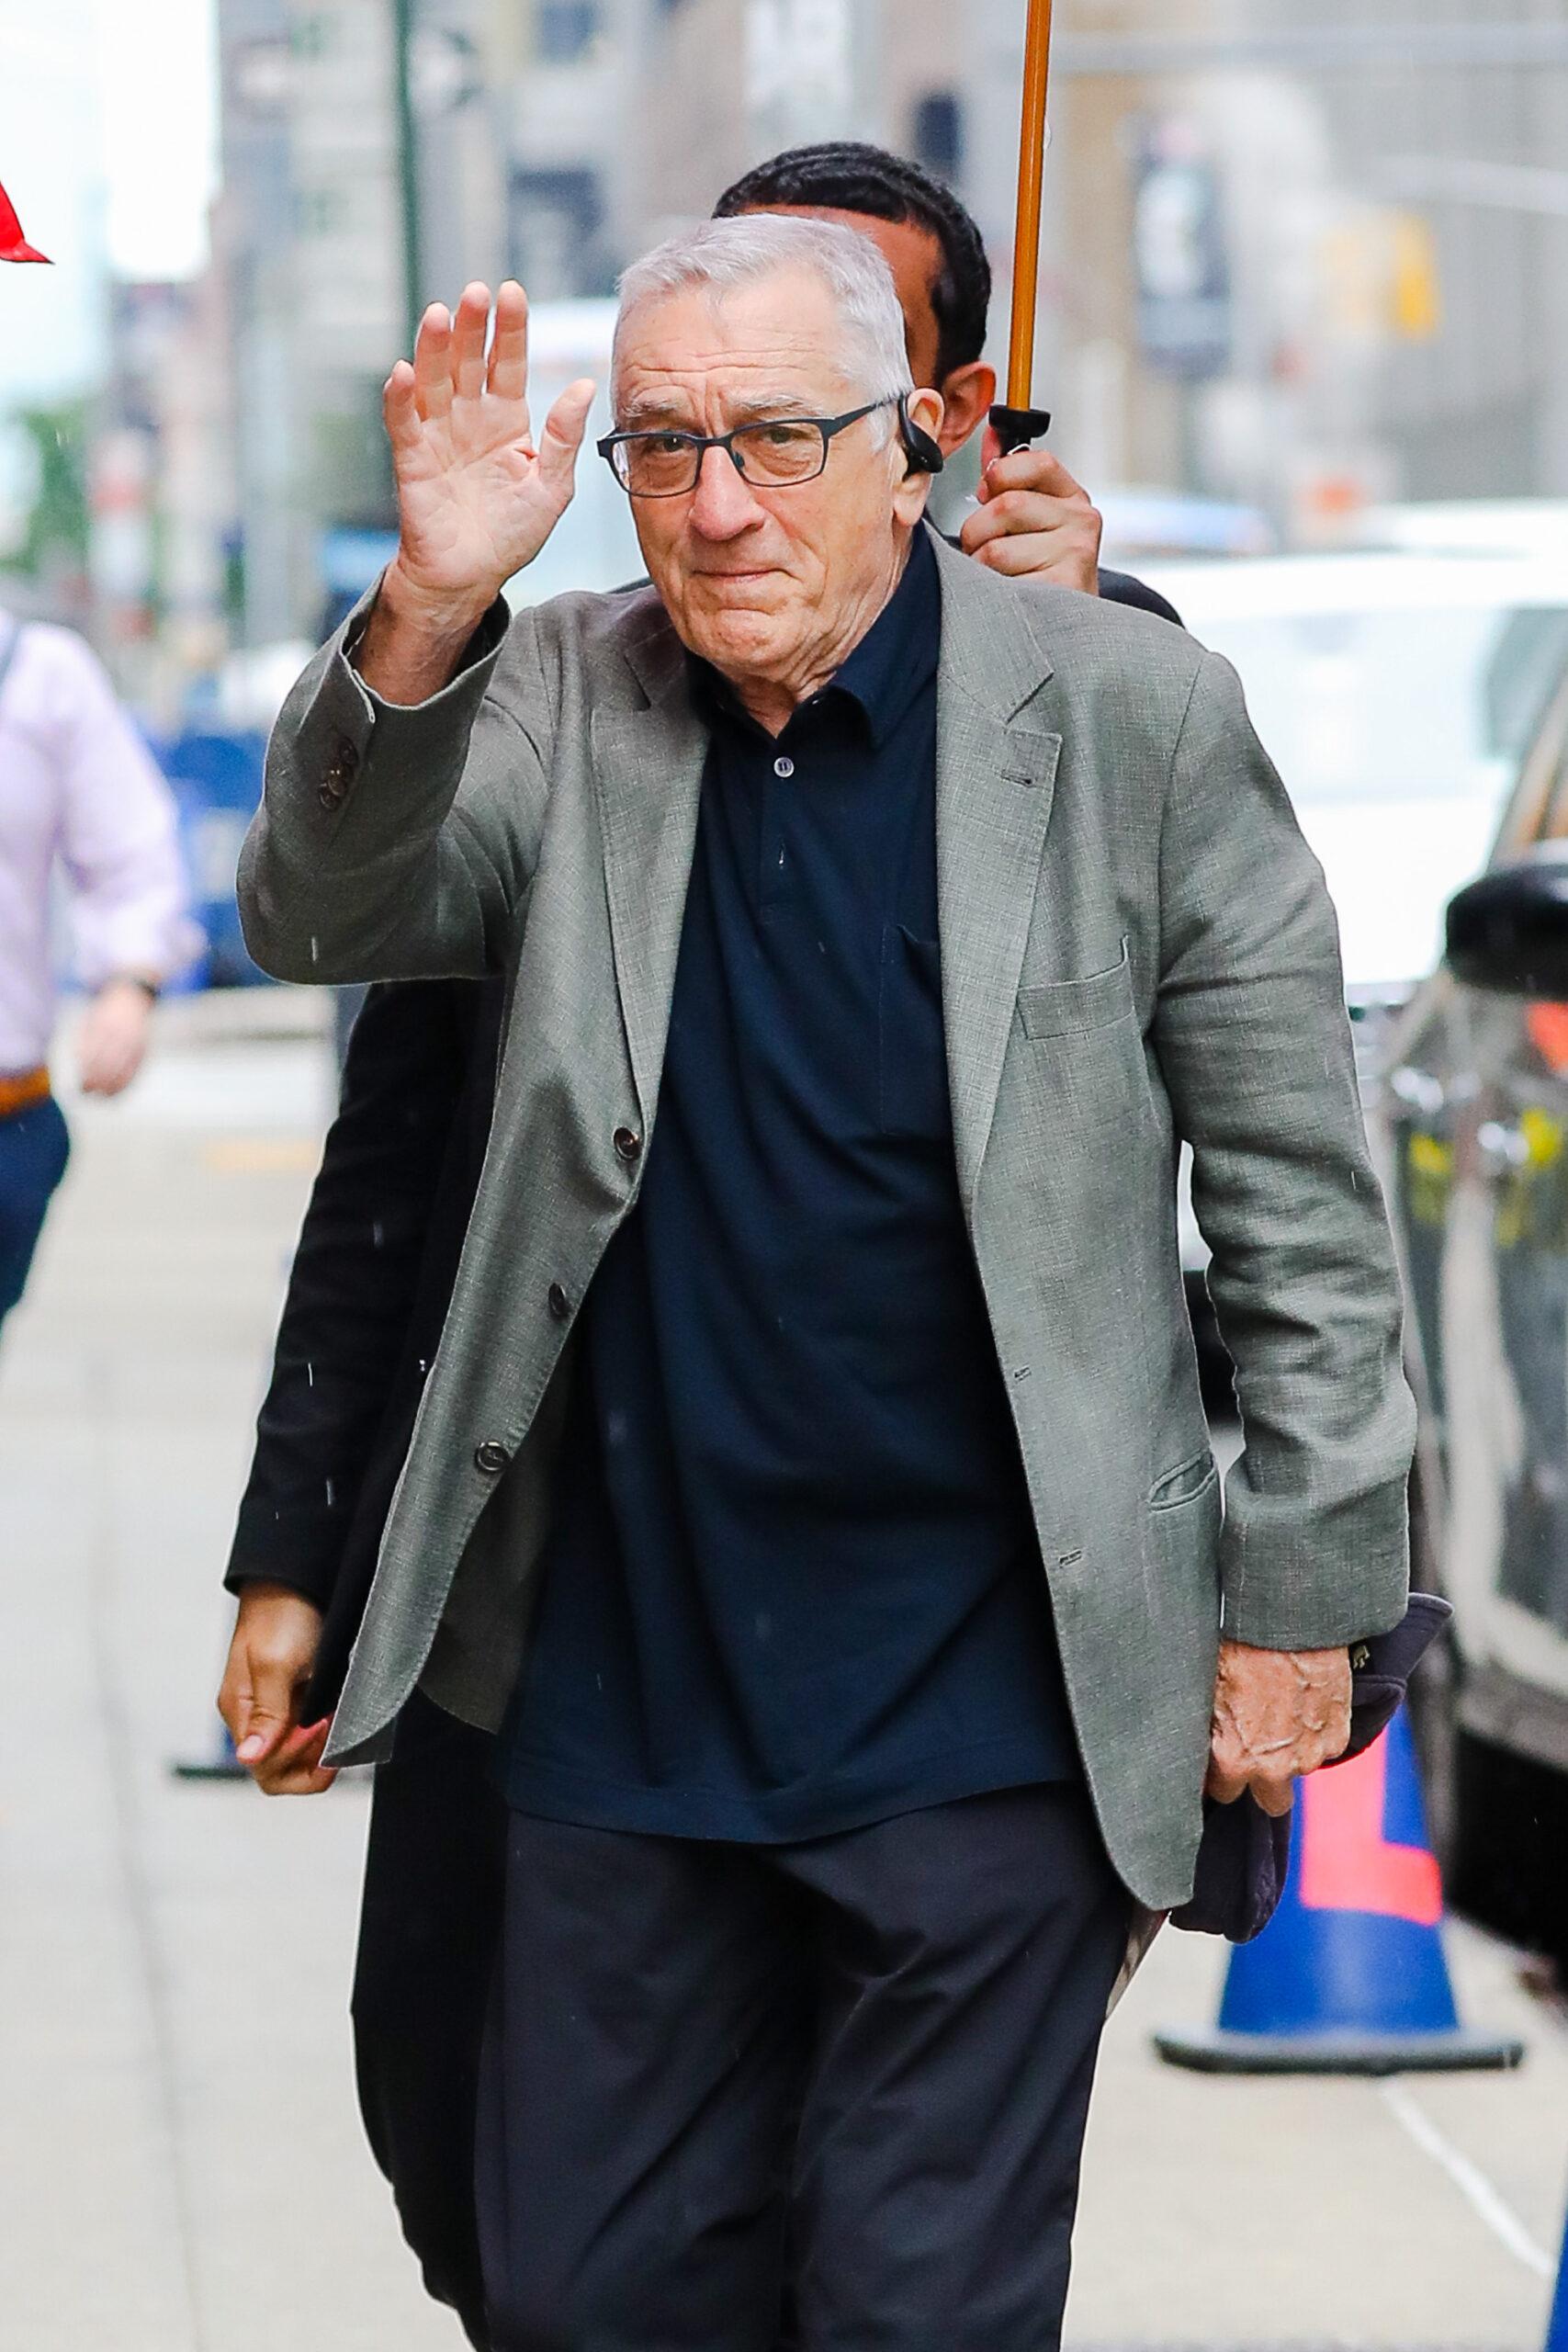 Robert De Niro was spotted arriving at The Late Show With Stephen Colbert in New York City